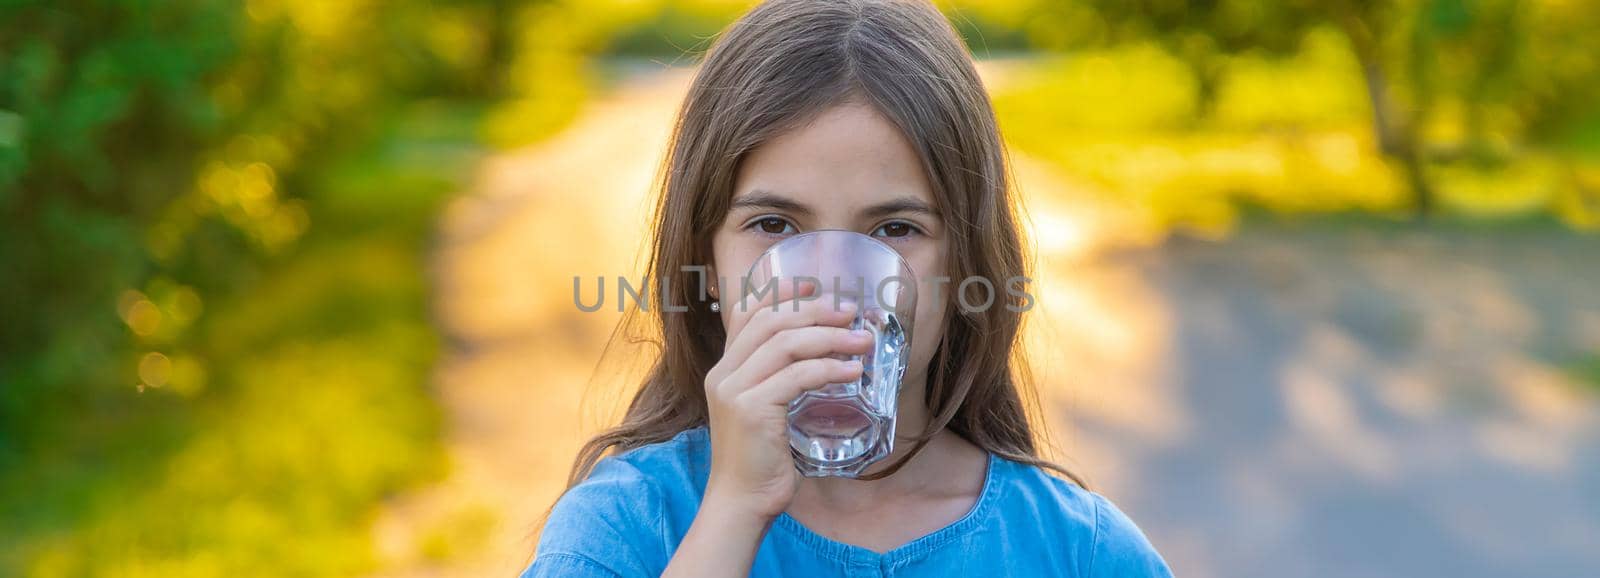 The child drinks water from a glass. Selective focus. by yanadjana